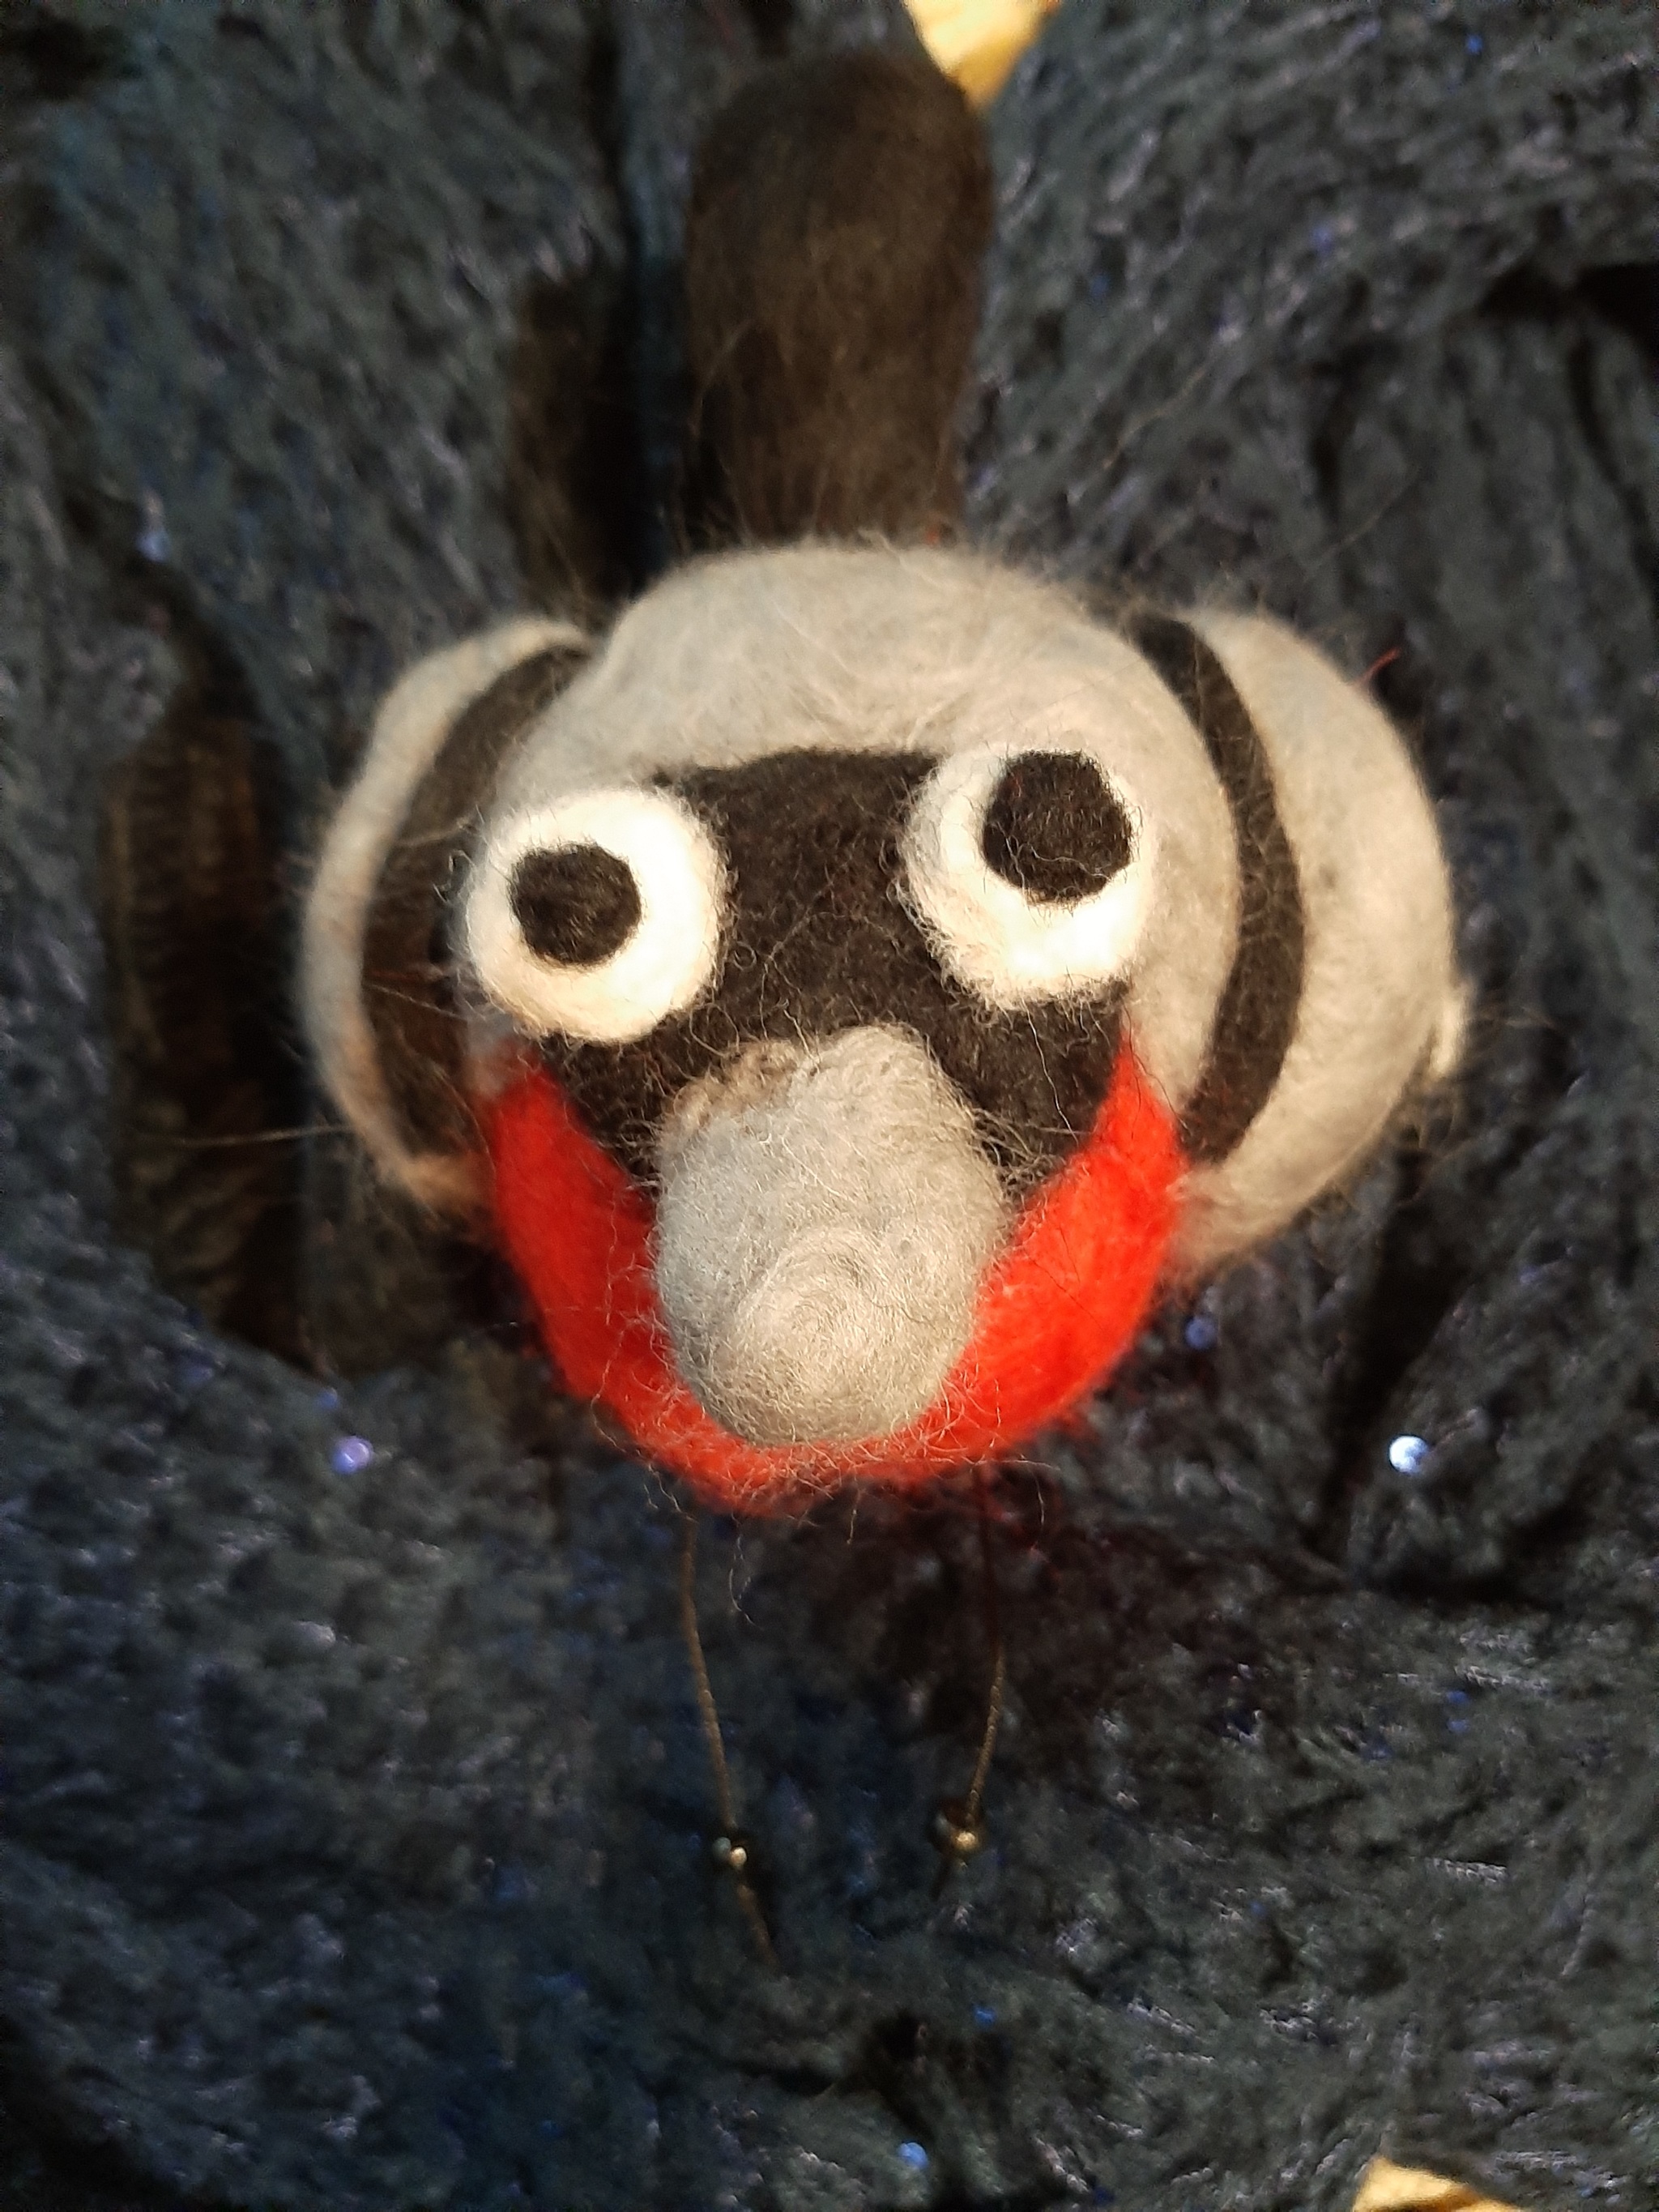 Expectation/Reality in handicrafts - My, Expectation, Reality, Needlework without process, Presents, Dry felting, Toys, Bullfinches